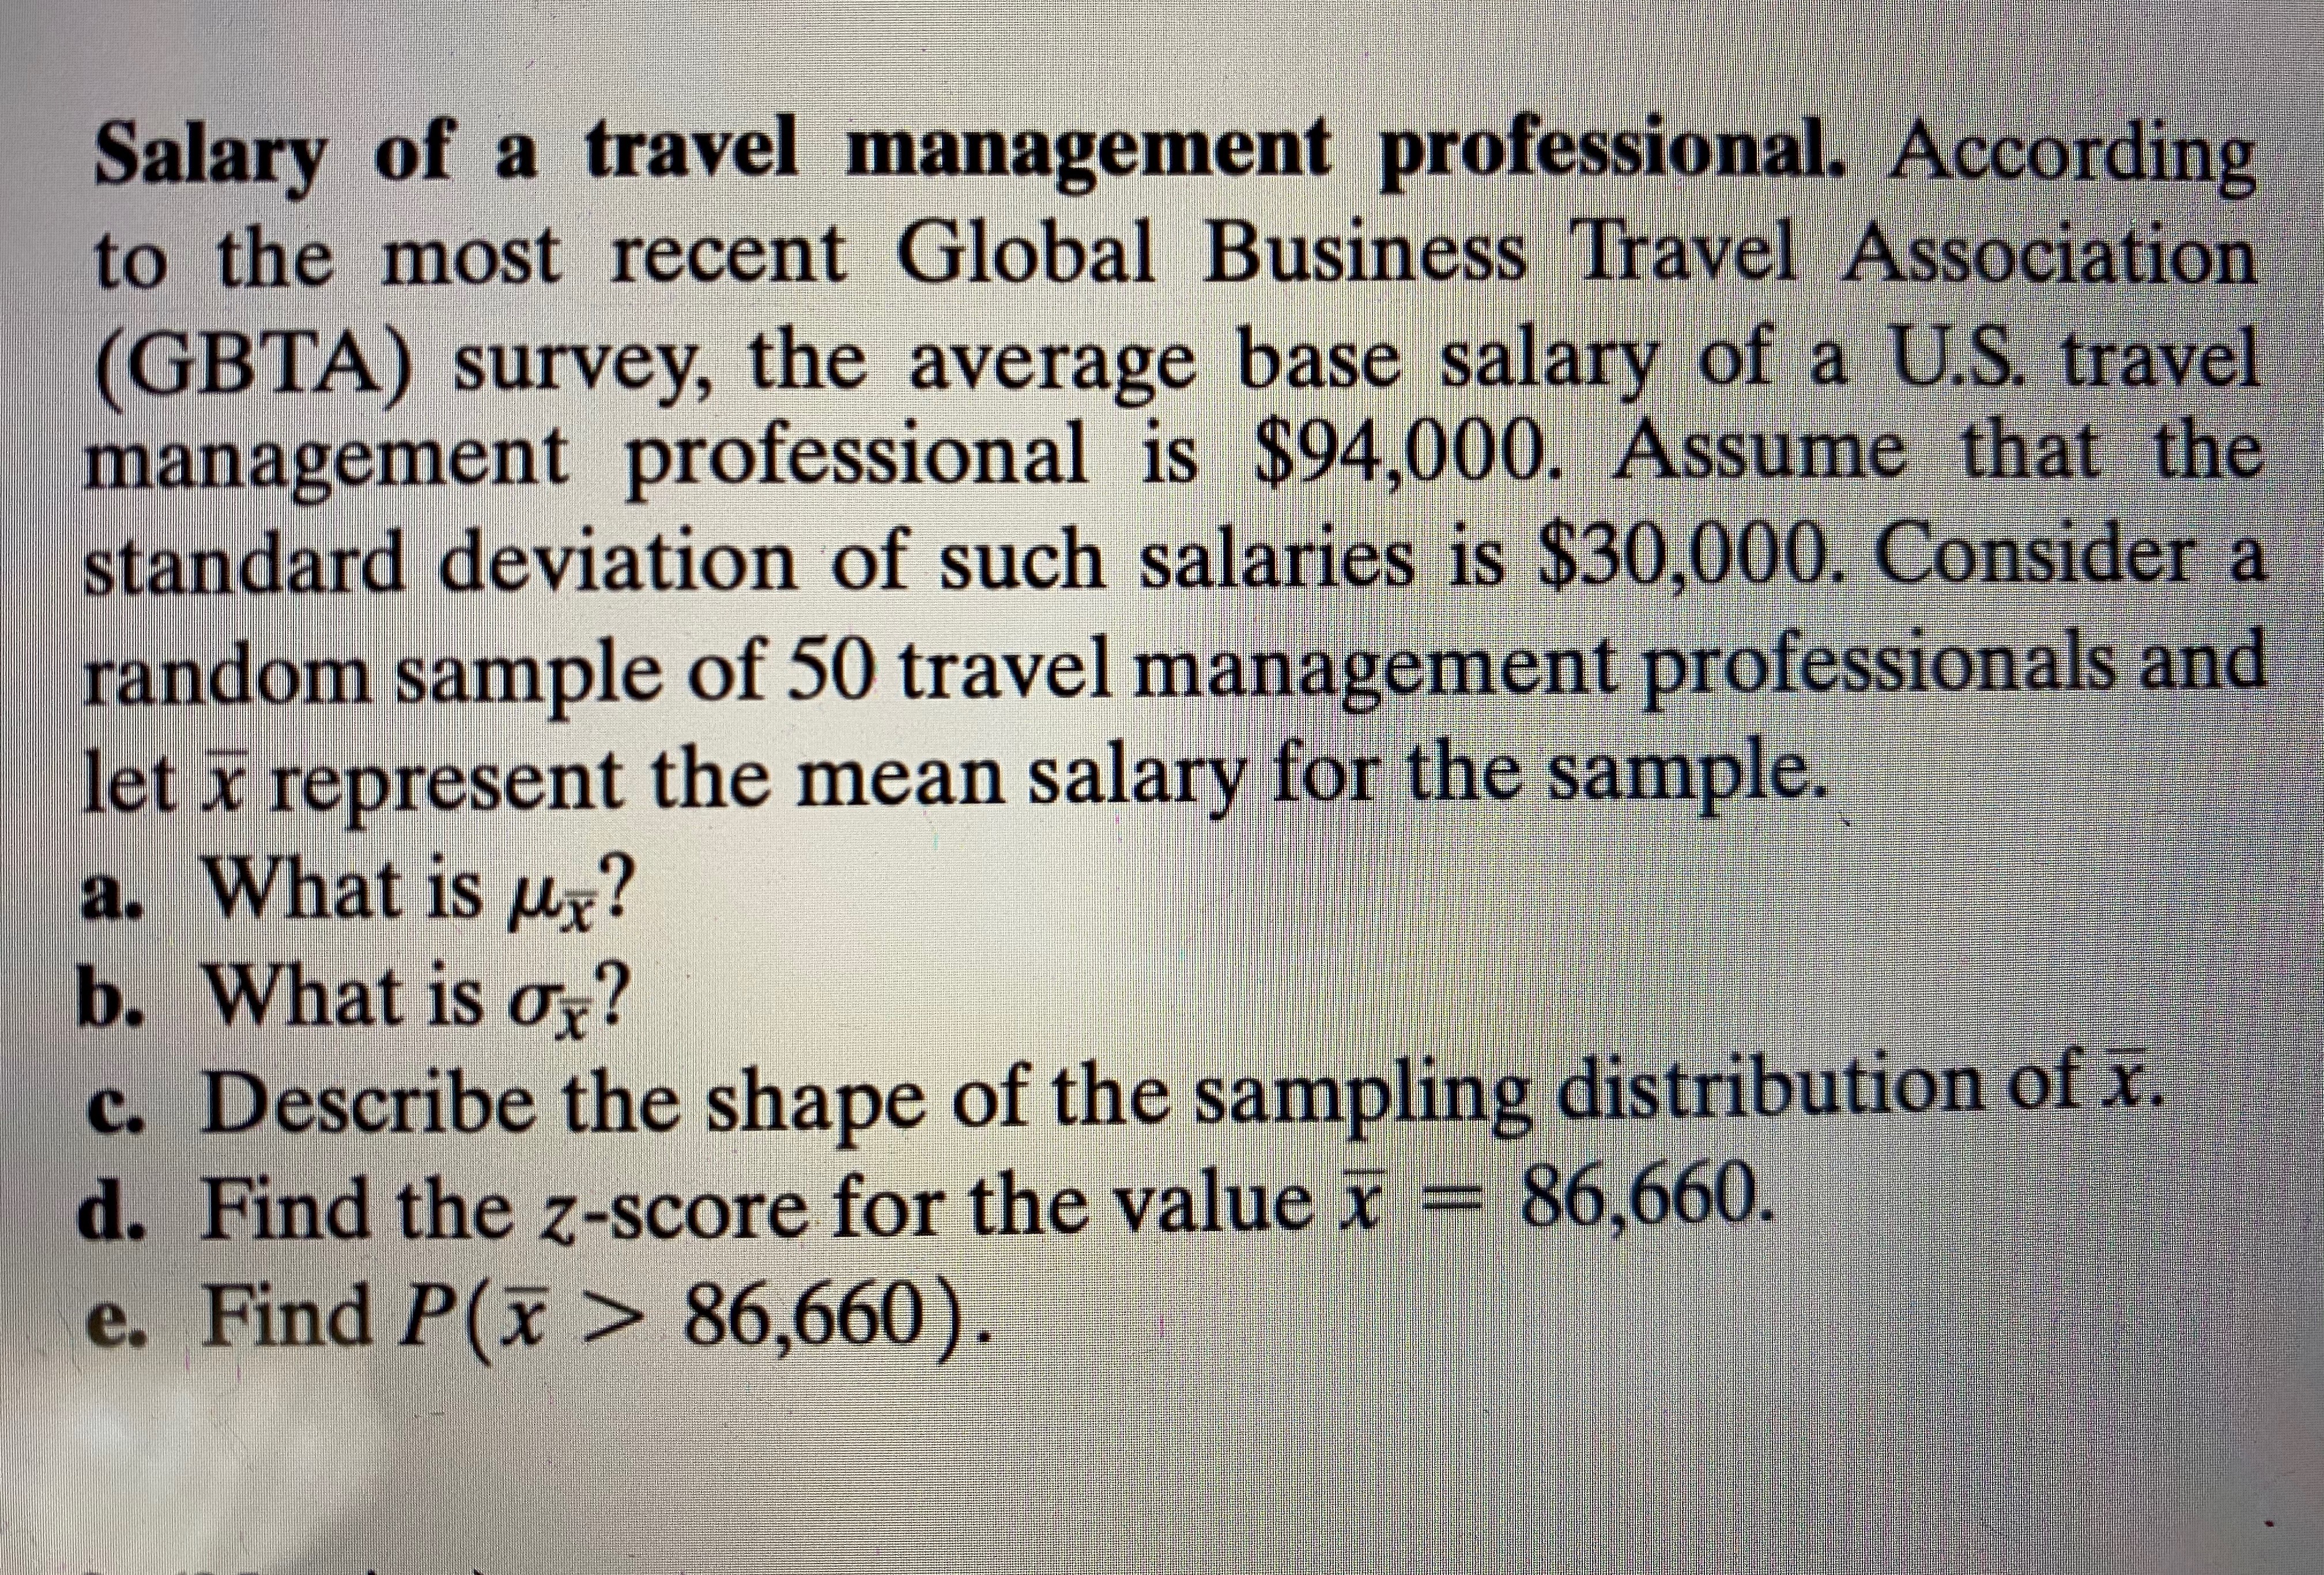 Salary of a travel management professional. According
to the most recent Global Business Travel Association
(GBTA) survey, the average base salary of a U.S. travel
management professional is $94,000. Assume that the
standard deviation of such salaries is $30,000. Consider a
random sample of 50 travel management professionals and
let x represent the mean salary for the sample.
a. What is ur?
b. What is o?
c. Describe the shape of the sampling distribution of x.
d. Find the z-score for the value x = 86,660.
e. Find P(x > 86,660).
